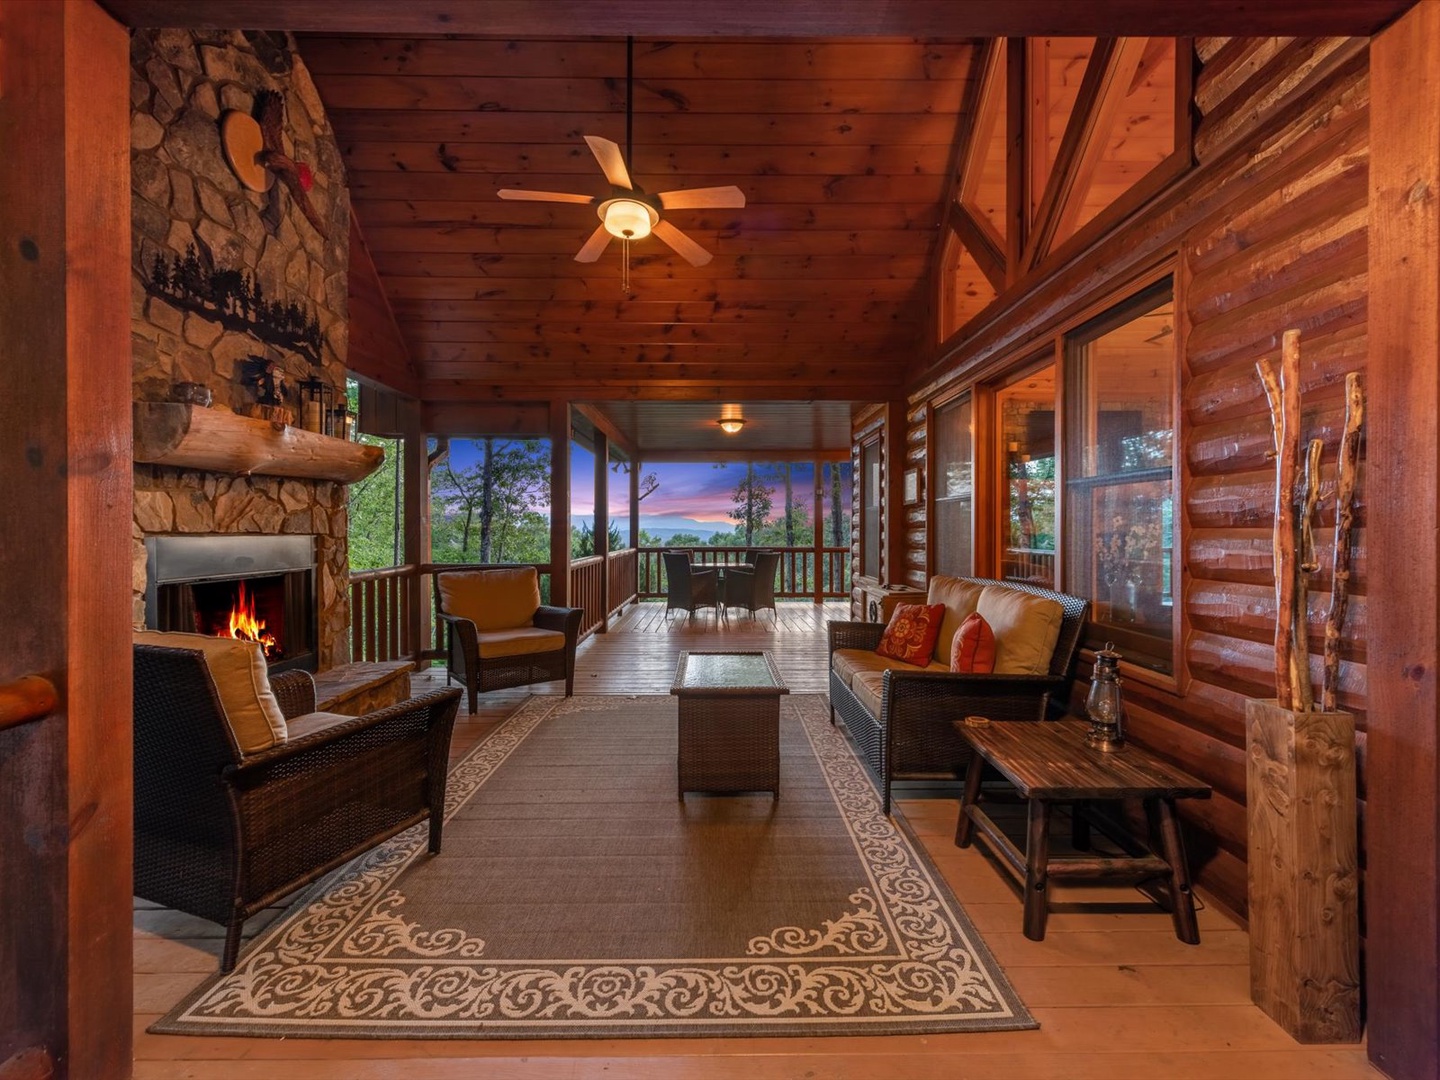 Soaring Hawk Lodge -  Entry Level Deck Outdoor Fireplace Area